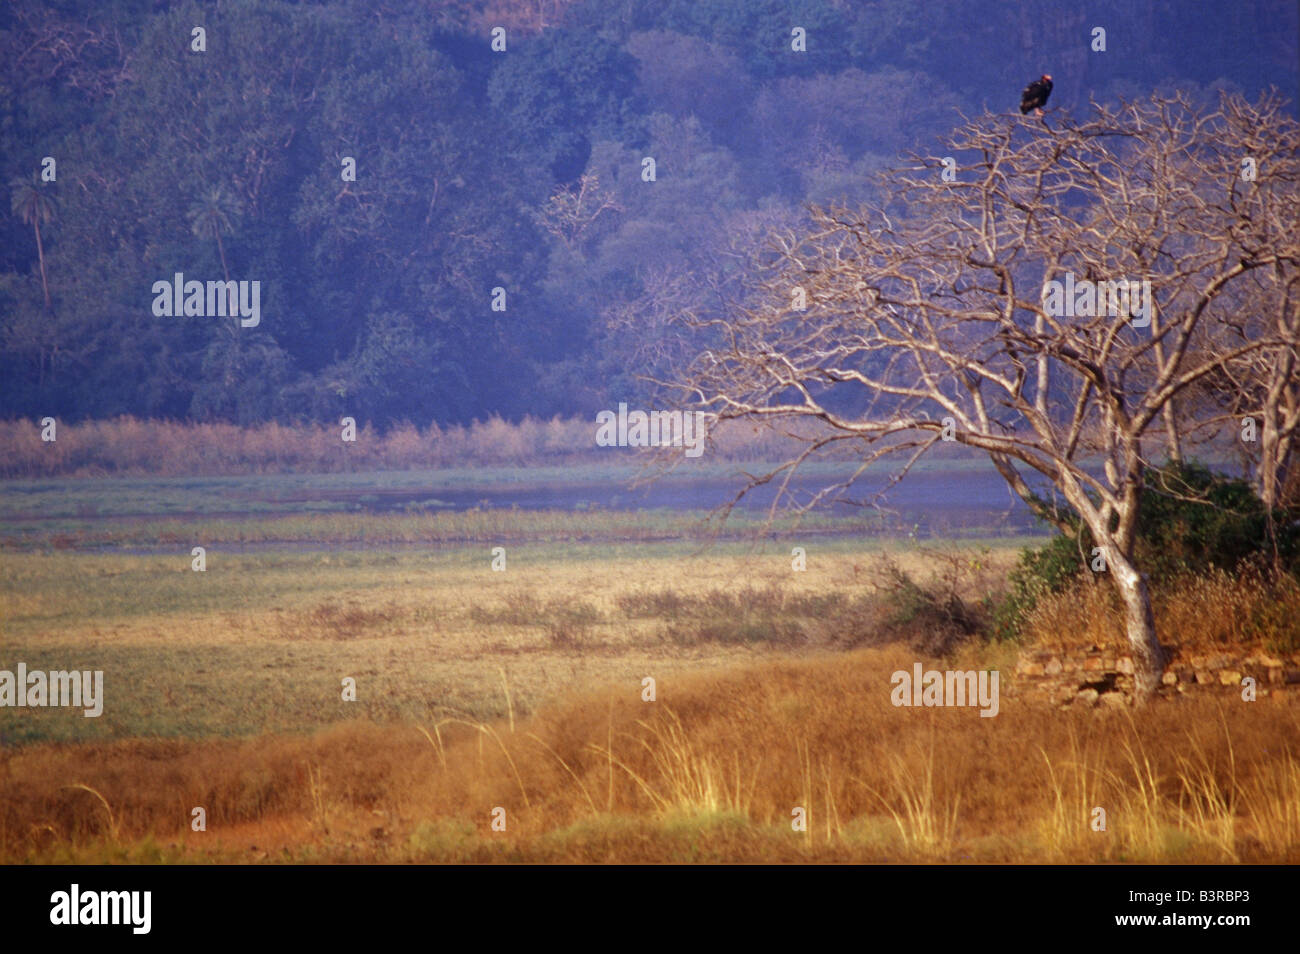 A view of the forest,lake early morning and a King vulture on the tree. Stock Photo